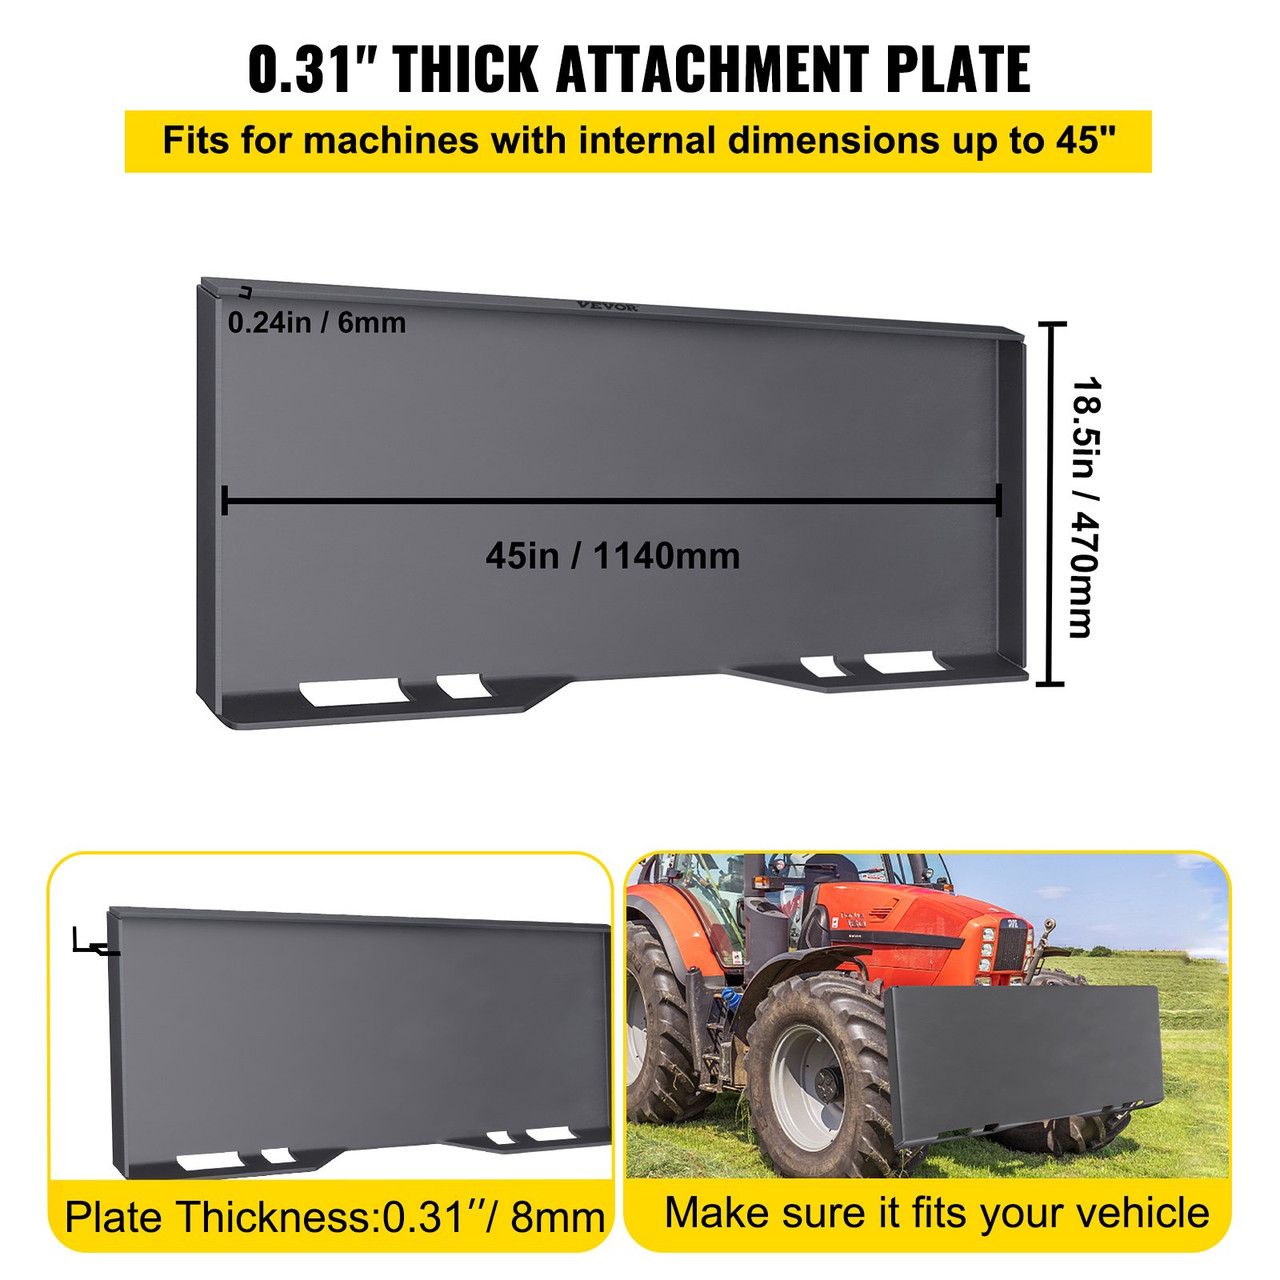 Skid Steer Mount Plate Thick Skid Steer Attachment Plate Steel Quick Attachment Loader Plate with 3 Additional Welding Rods Easy to Weld or Bolt to Different Accessories (5/16")